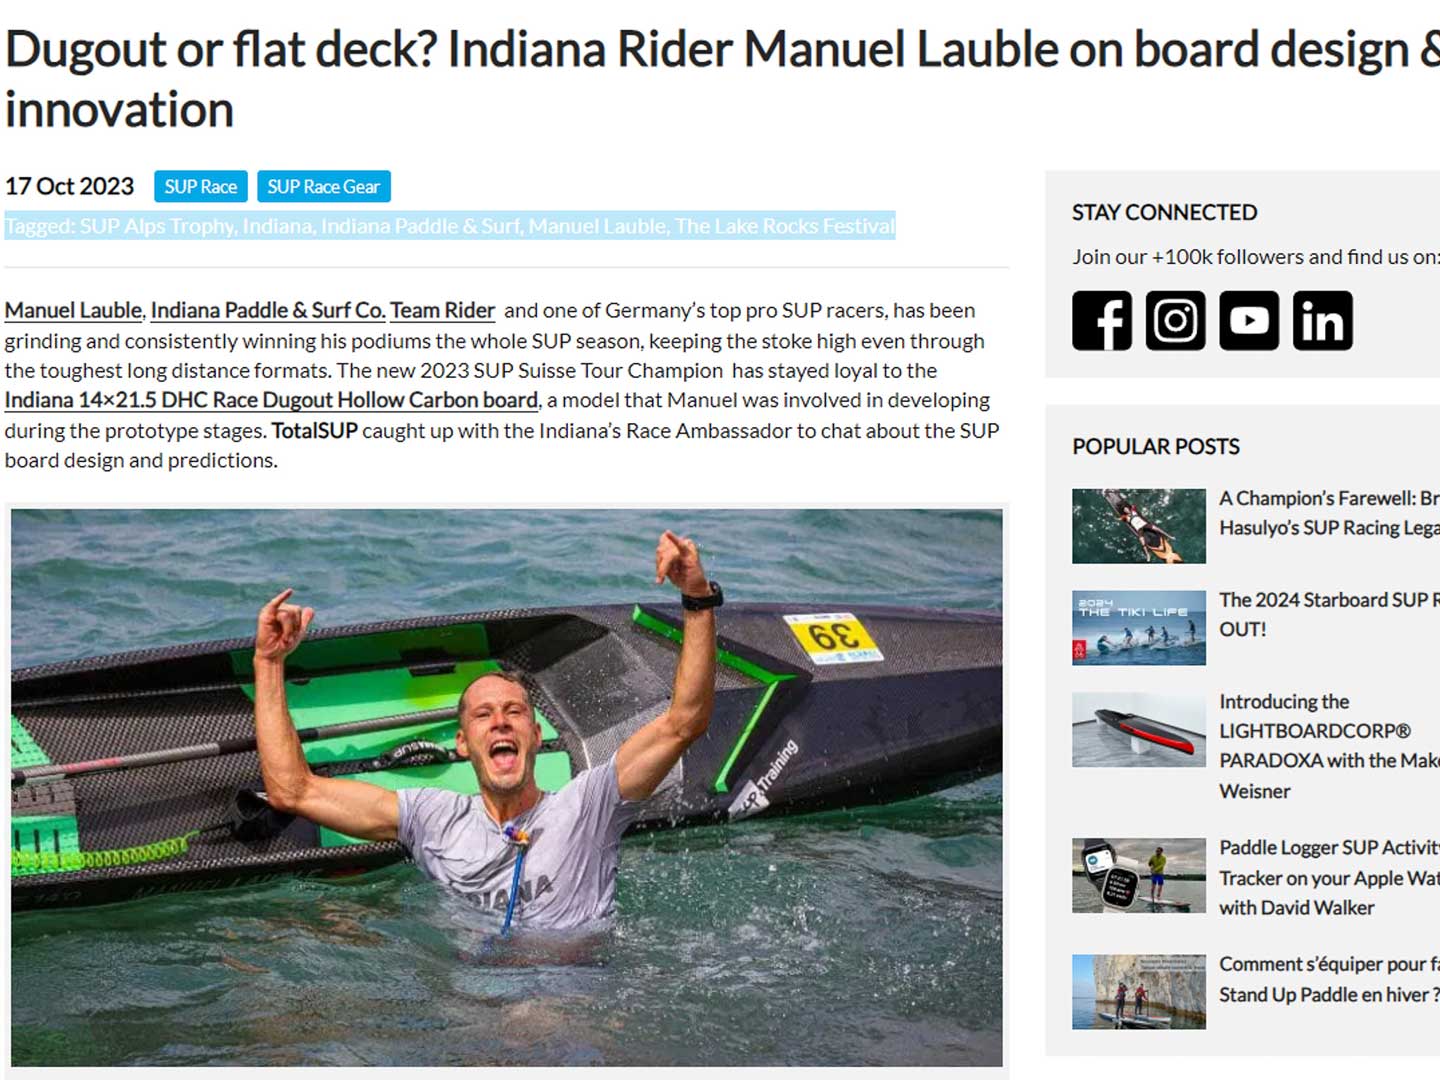 Dugout or flat deck? Indiana Rider Manuel Lauble on board design & innovation